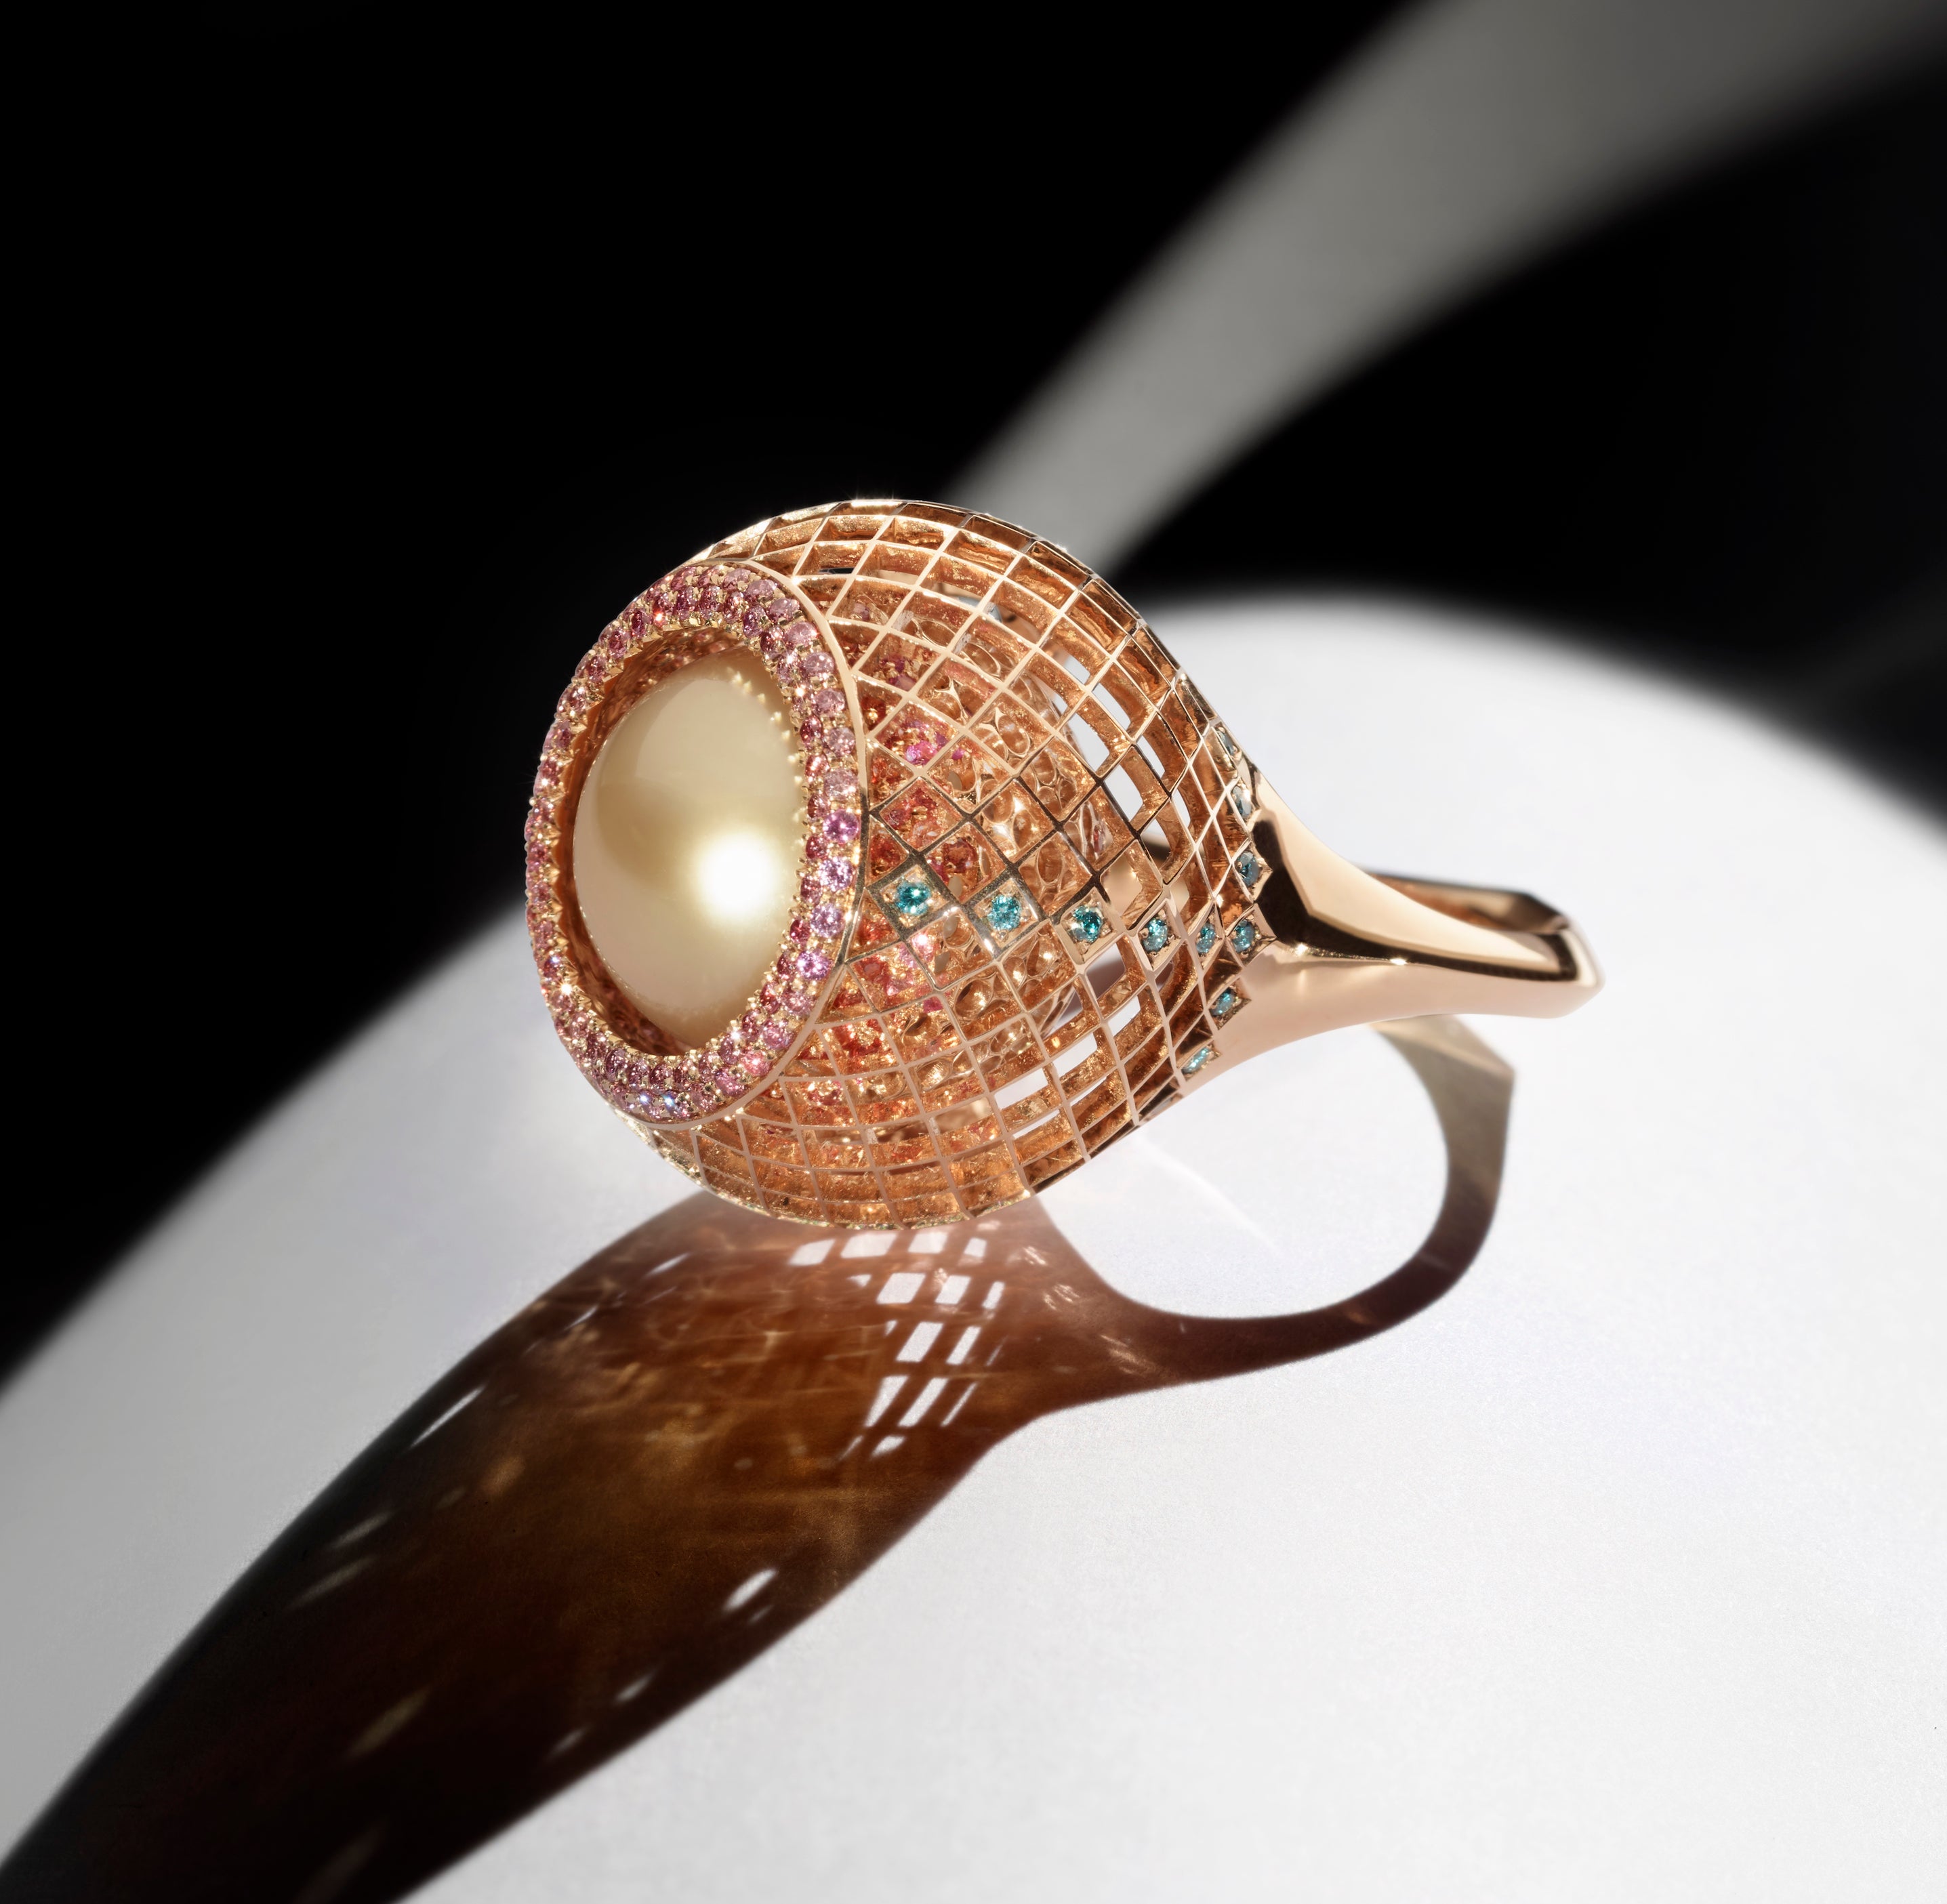 ETHOS OF LONDON - FINE JEWELRY AND COLLECTIBLE – Ethos of London